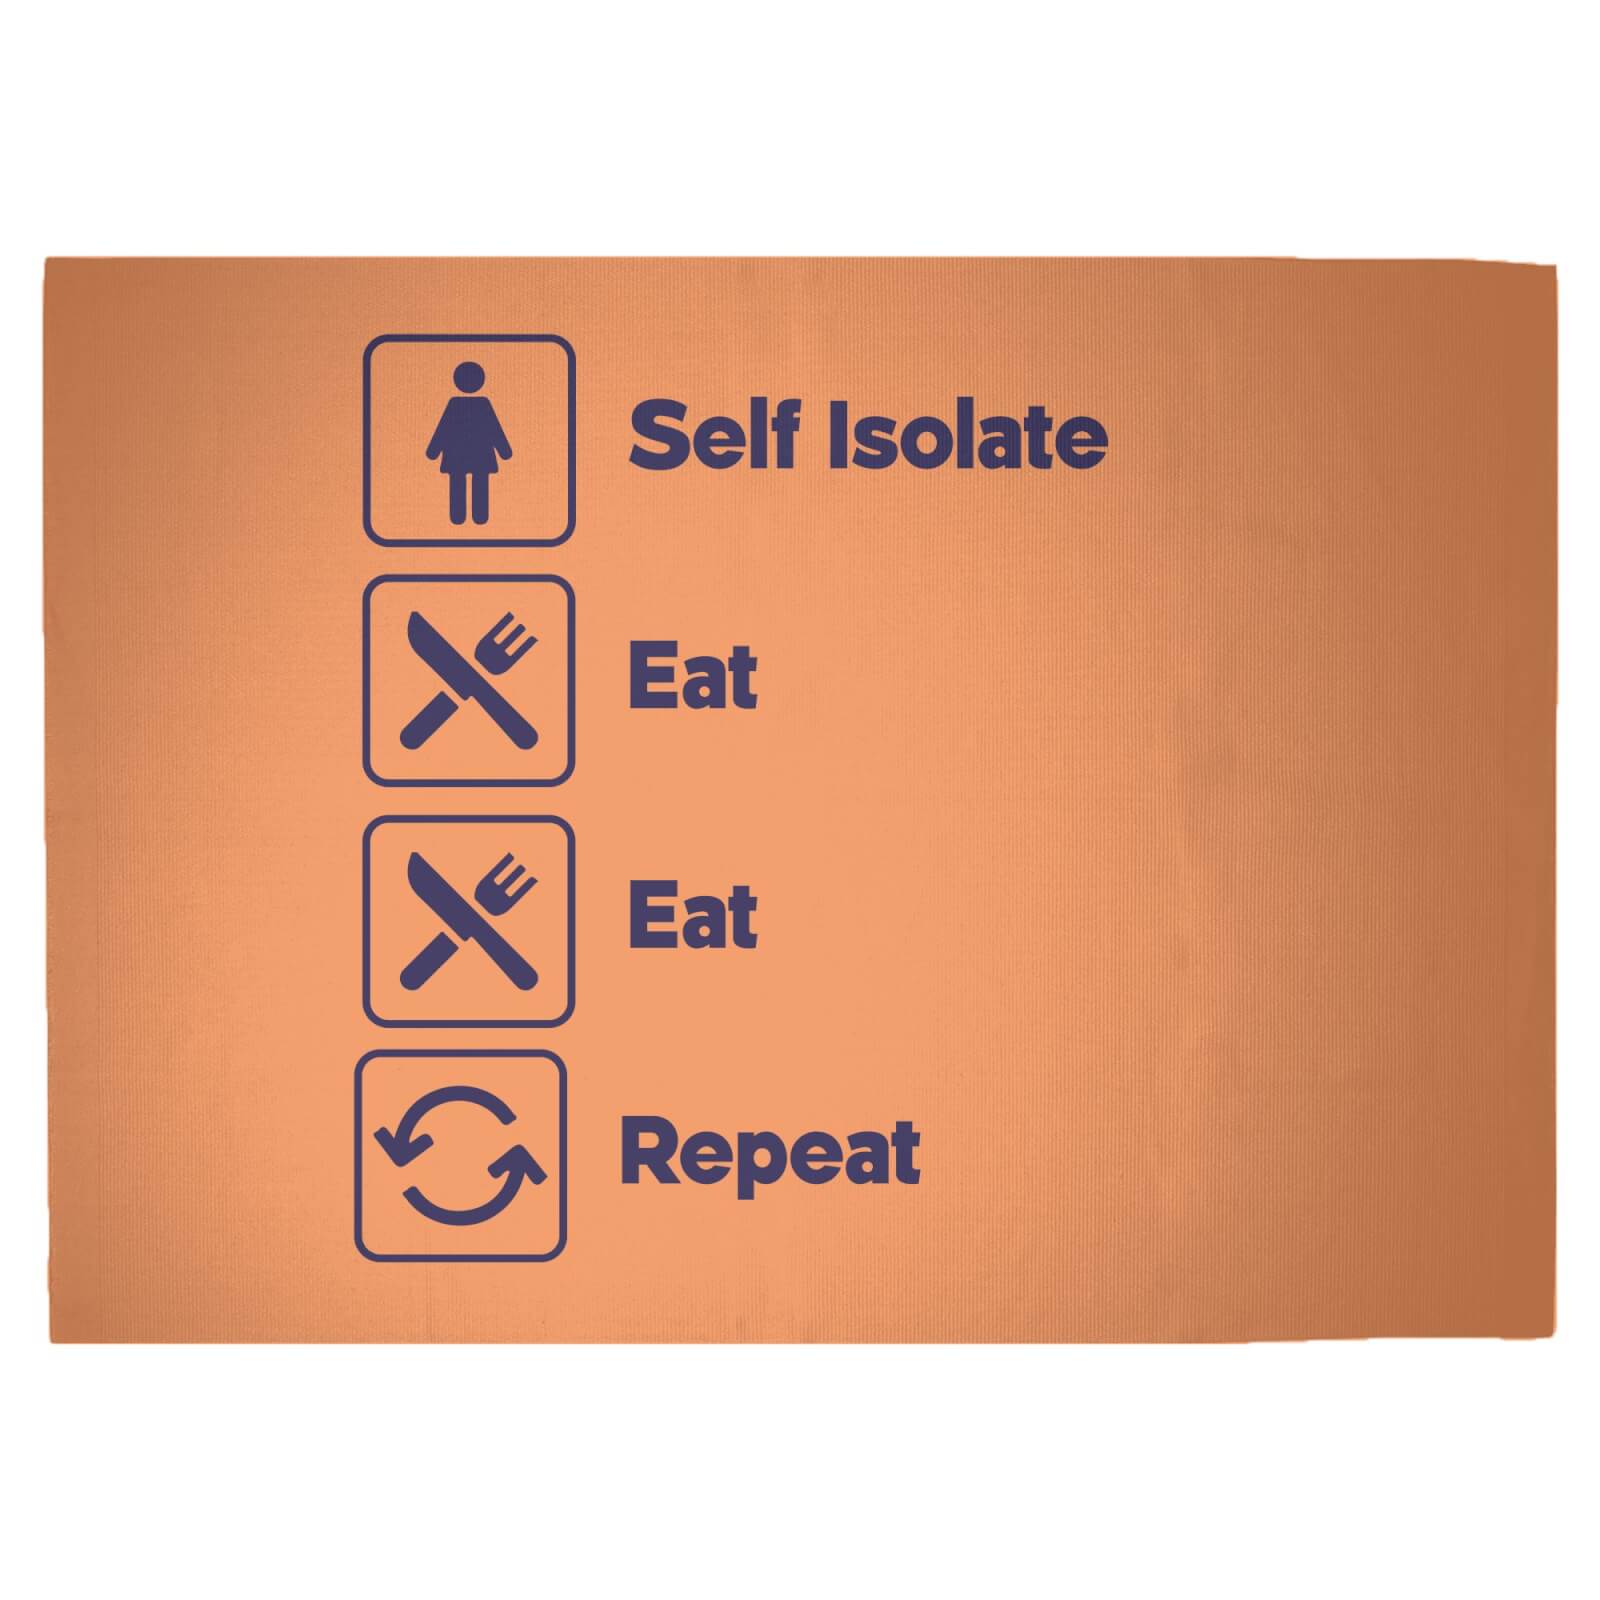 Ladies Self Isolate Eat Eat Repeat Woven Rug - Large